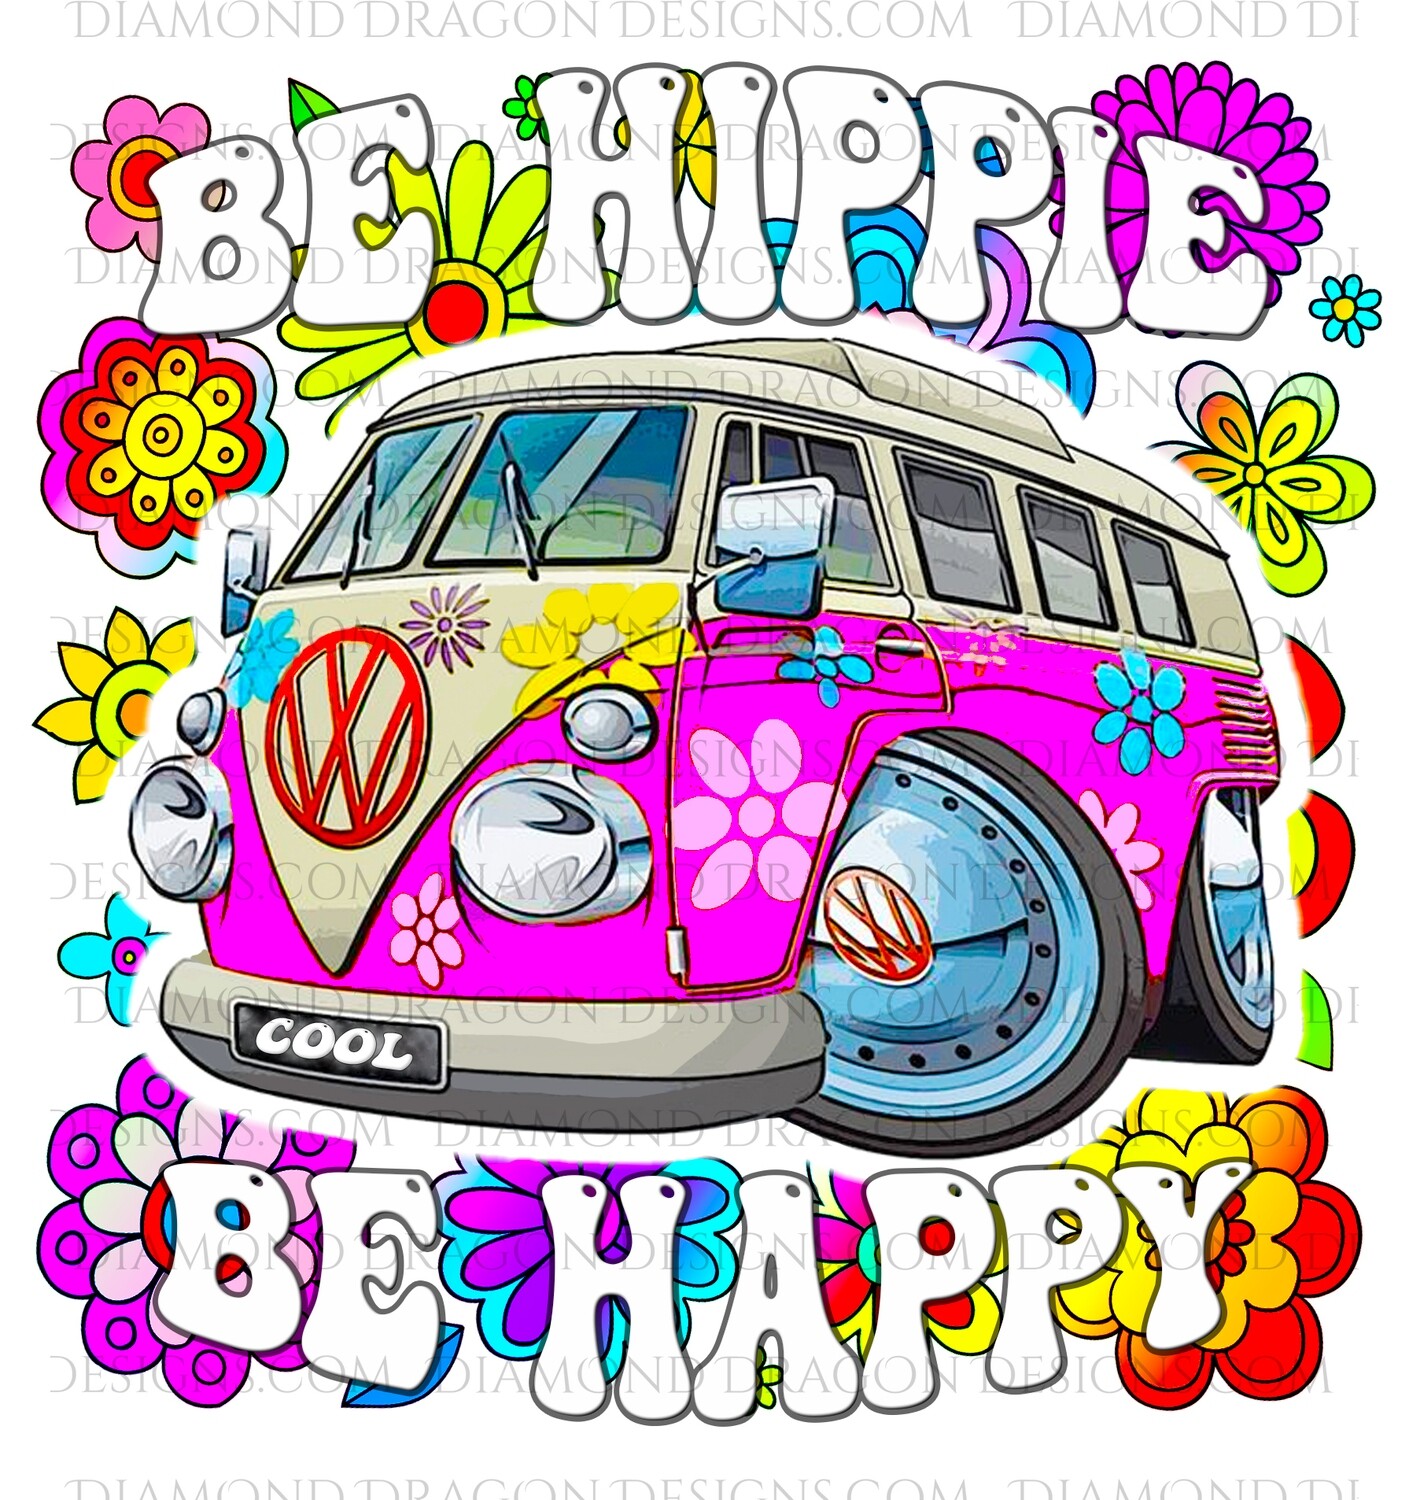 Quotes - Be Hippie, Be Happy, 70s, VW Bus, Retro Pink, Digital Image